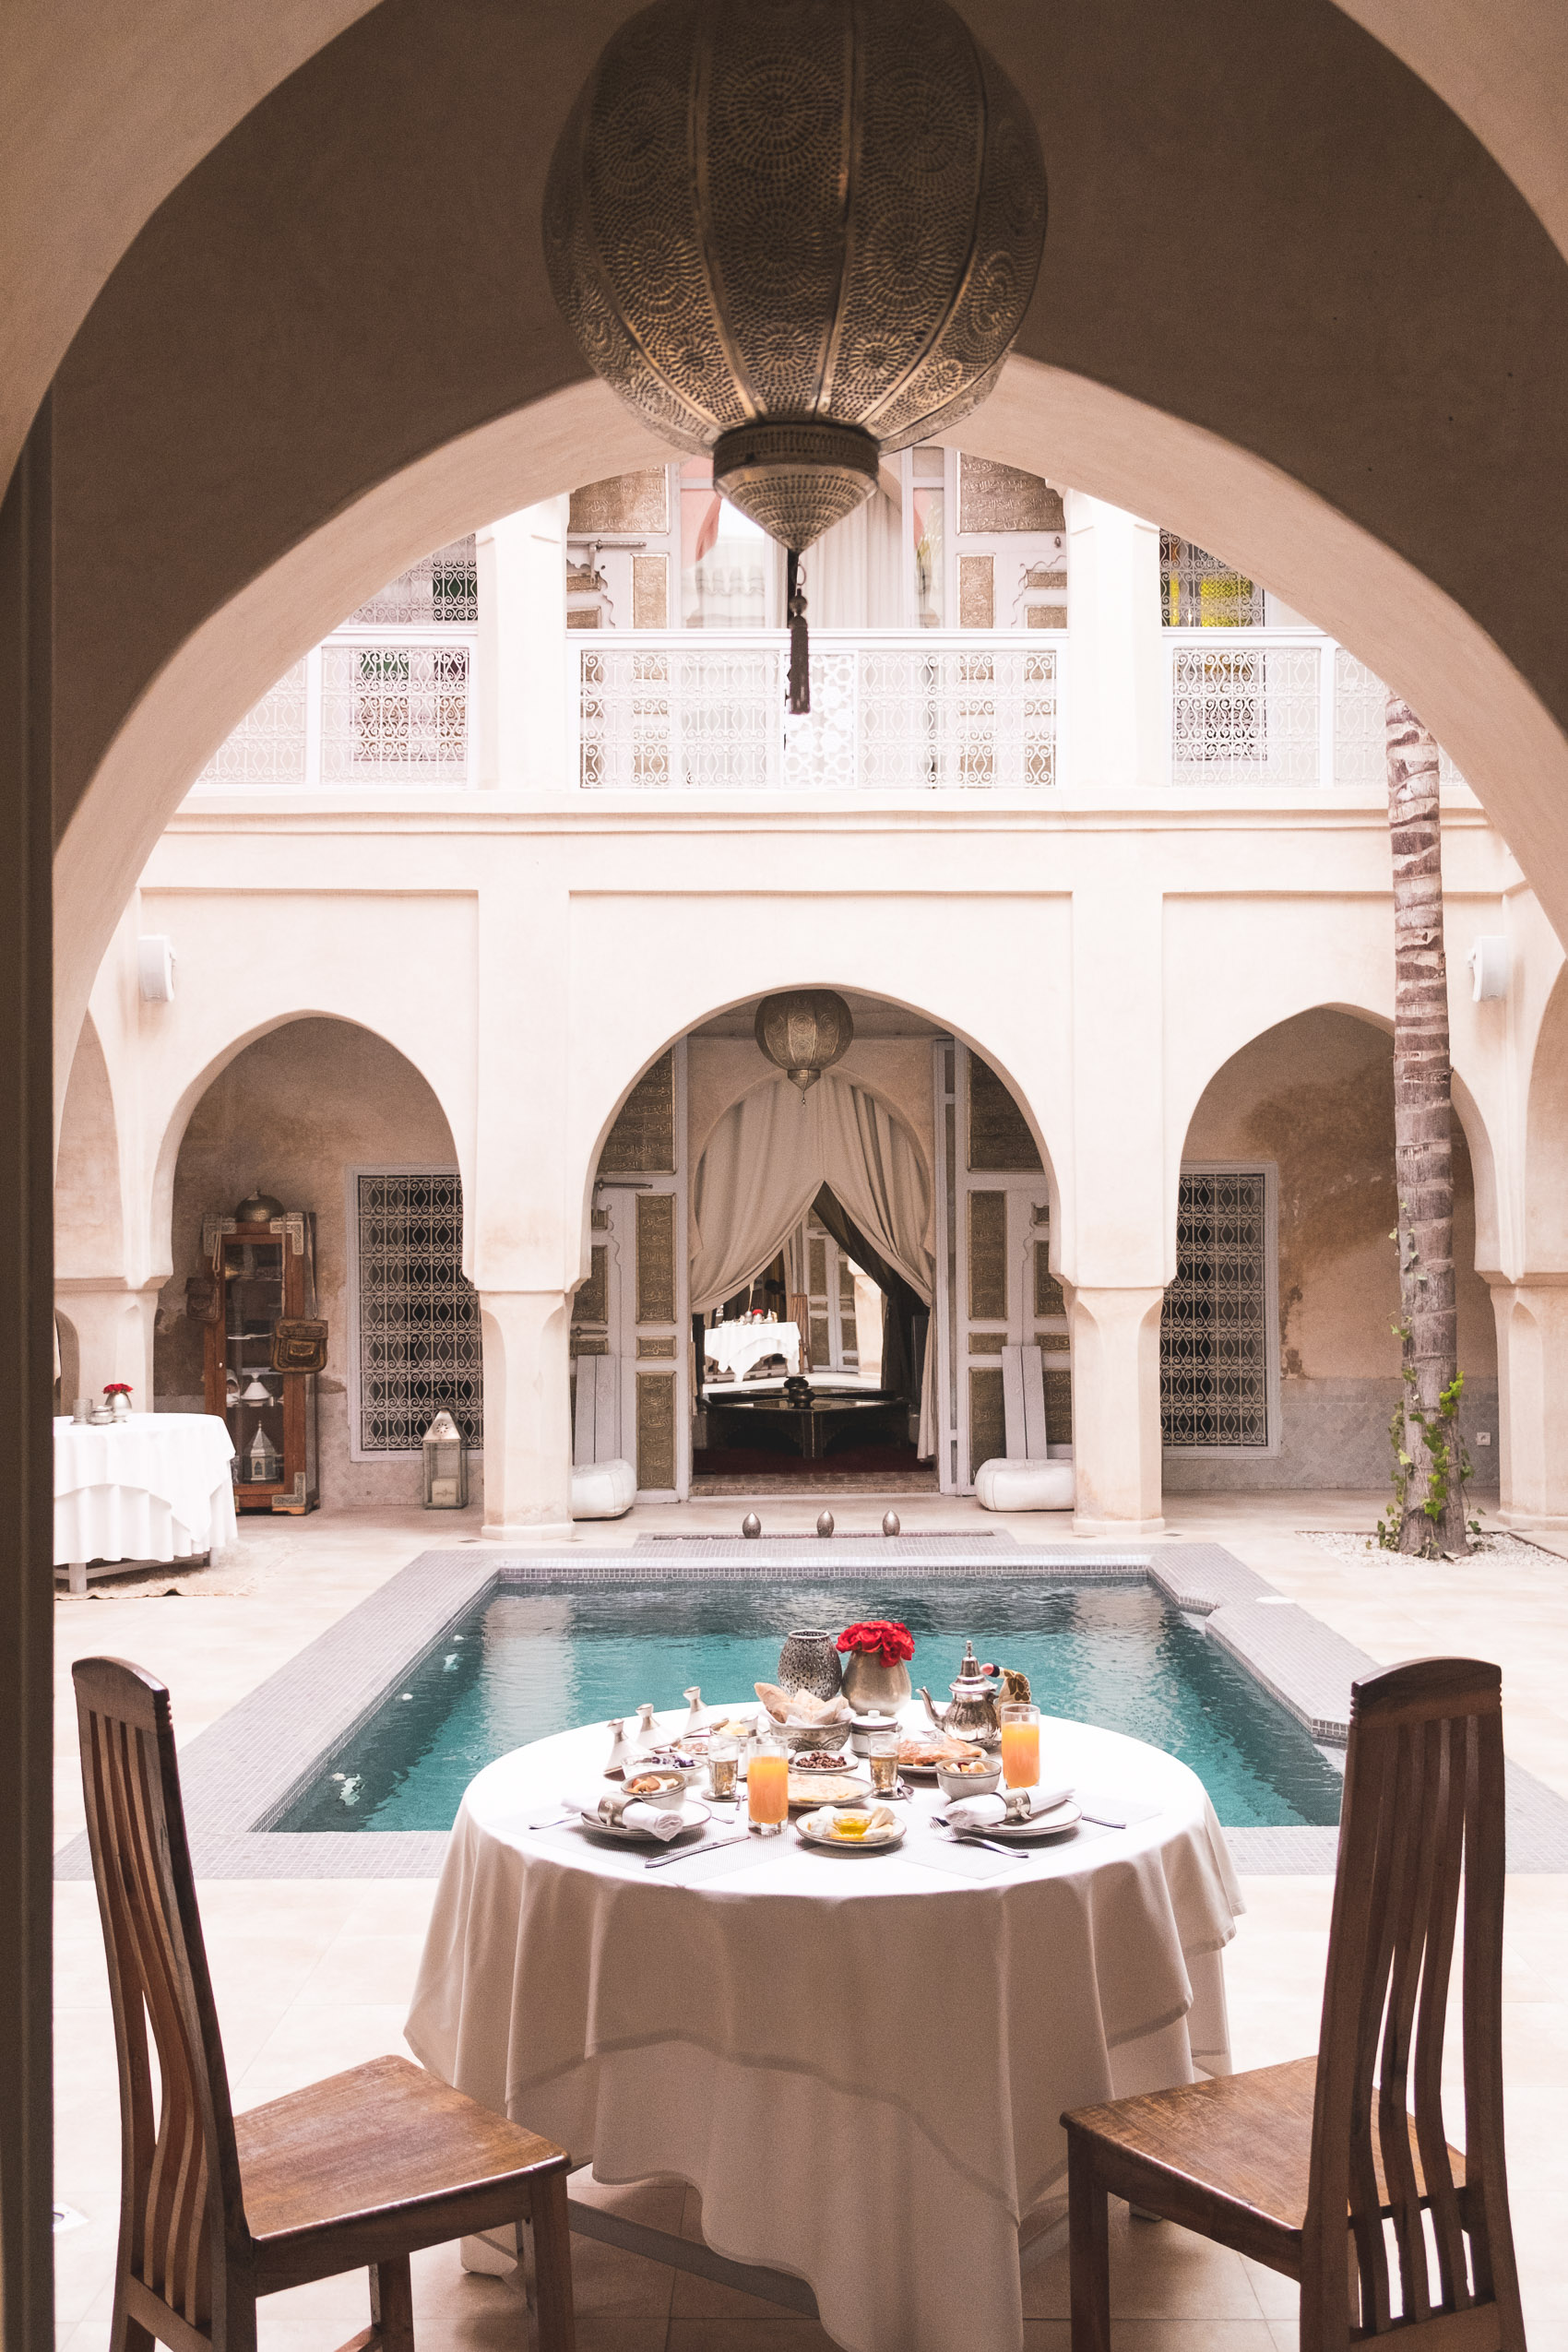 Accommodations in Morocco